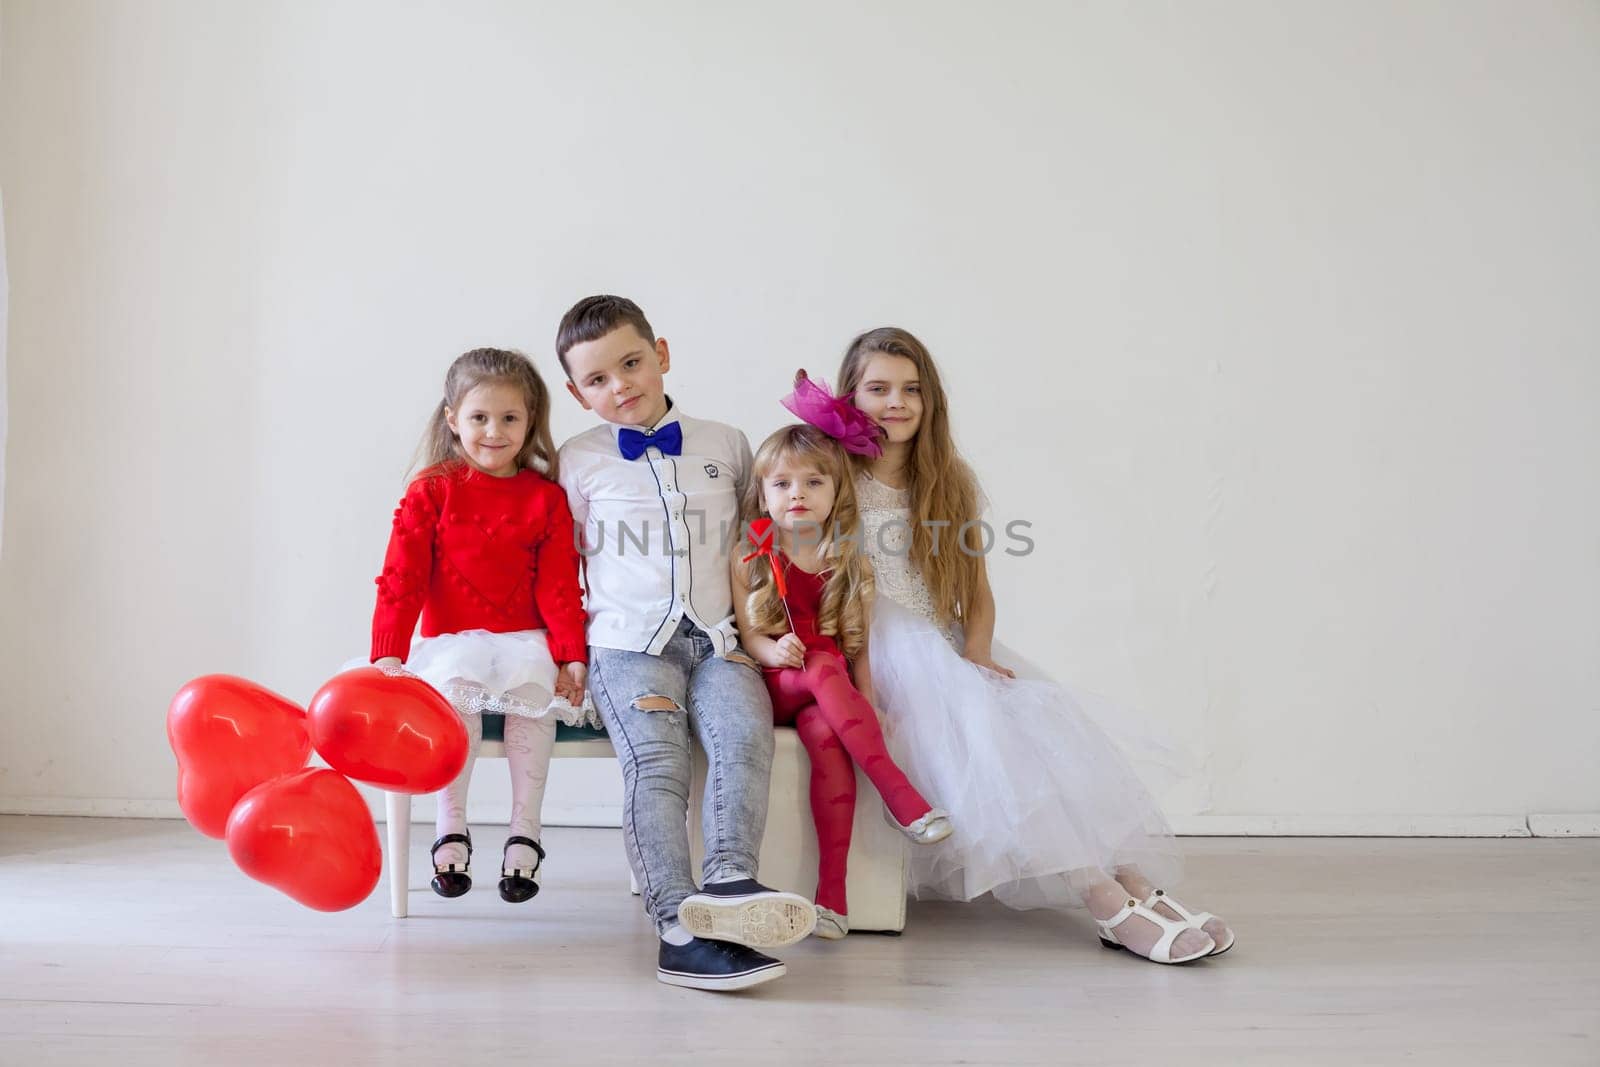 beautiful little kids with red balloons for the holiday by Simakov